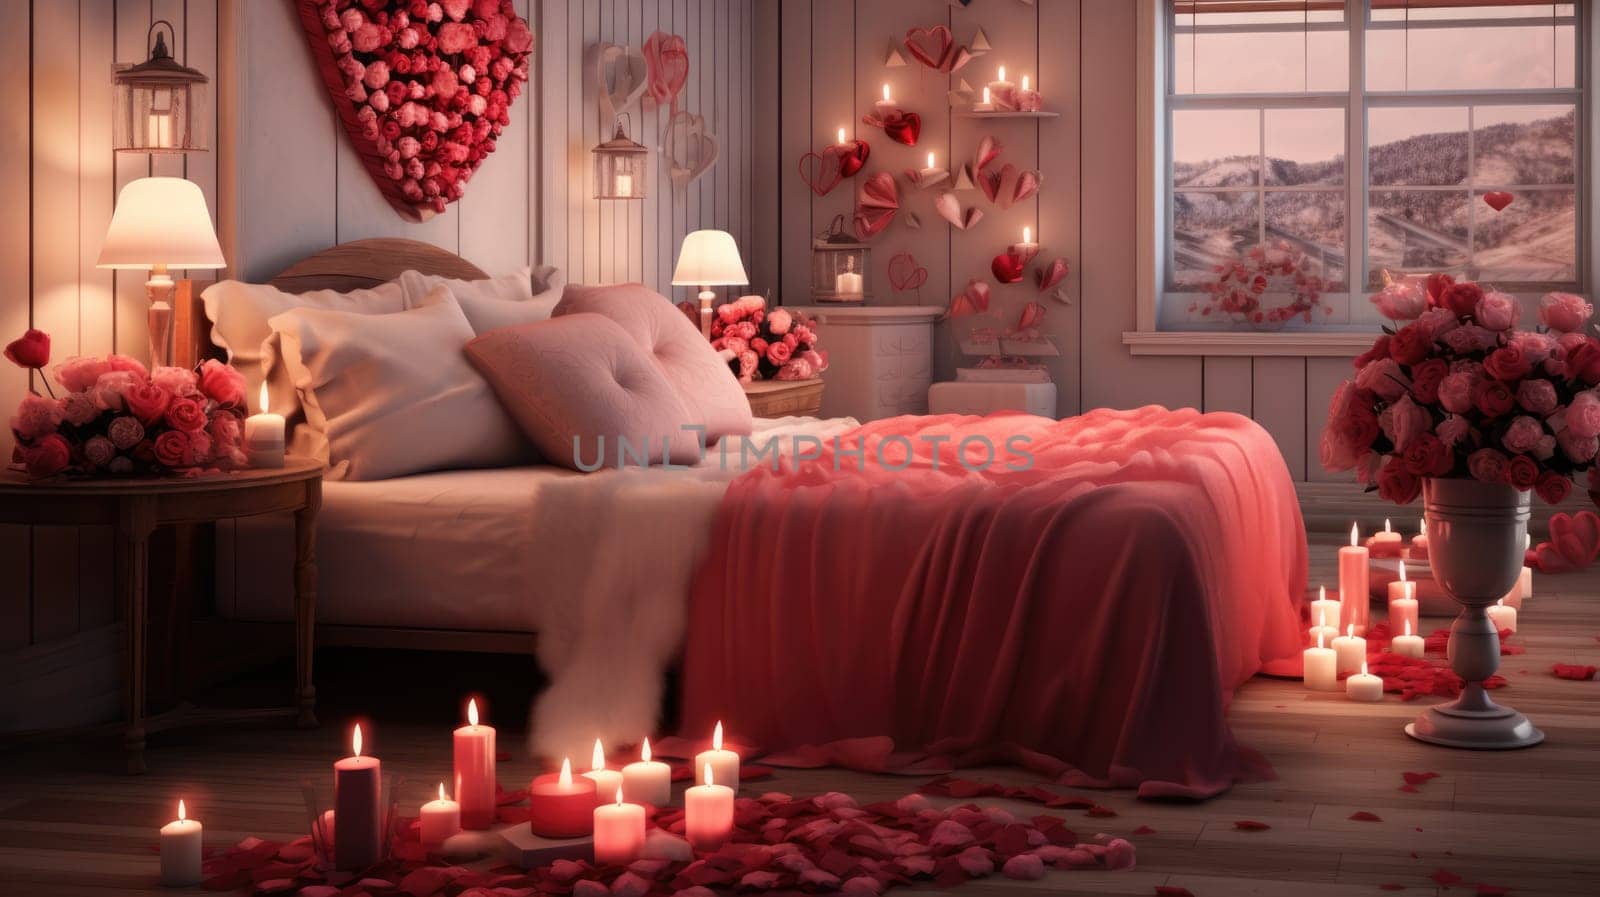 Interior of festive room decorated for Valentine's Day with air balloons, flowers and candles by JuliaDorian